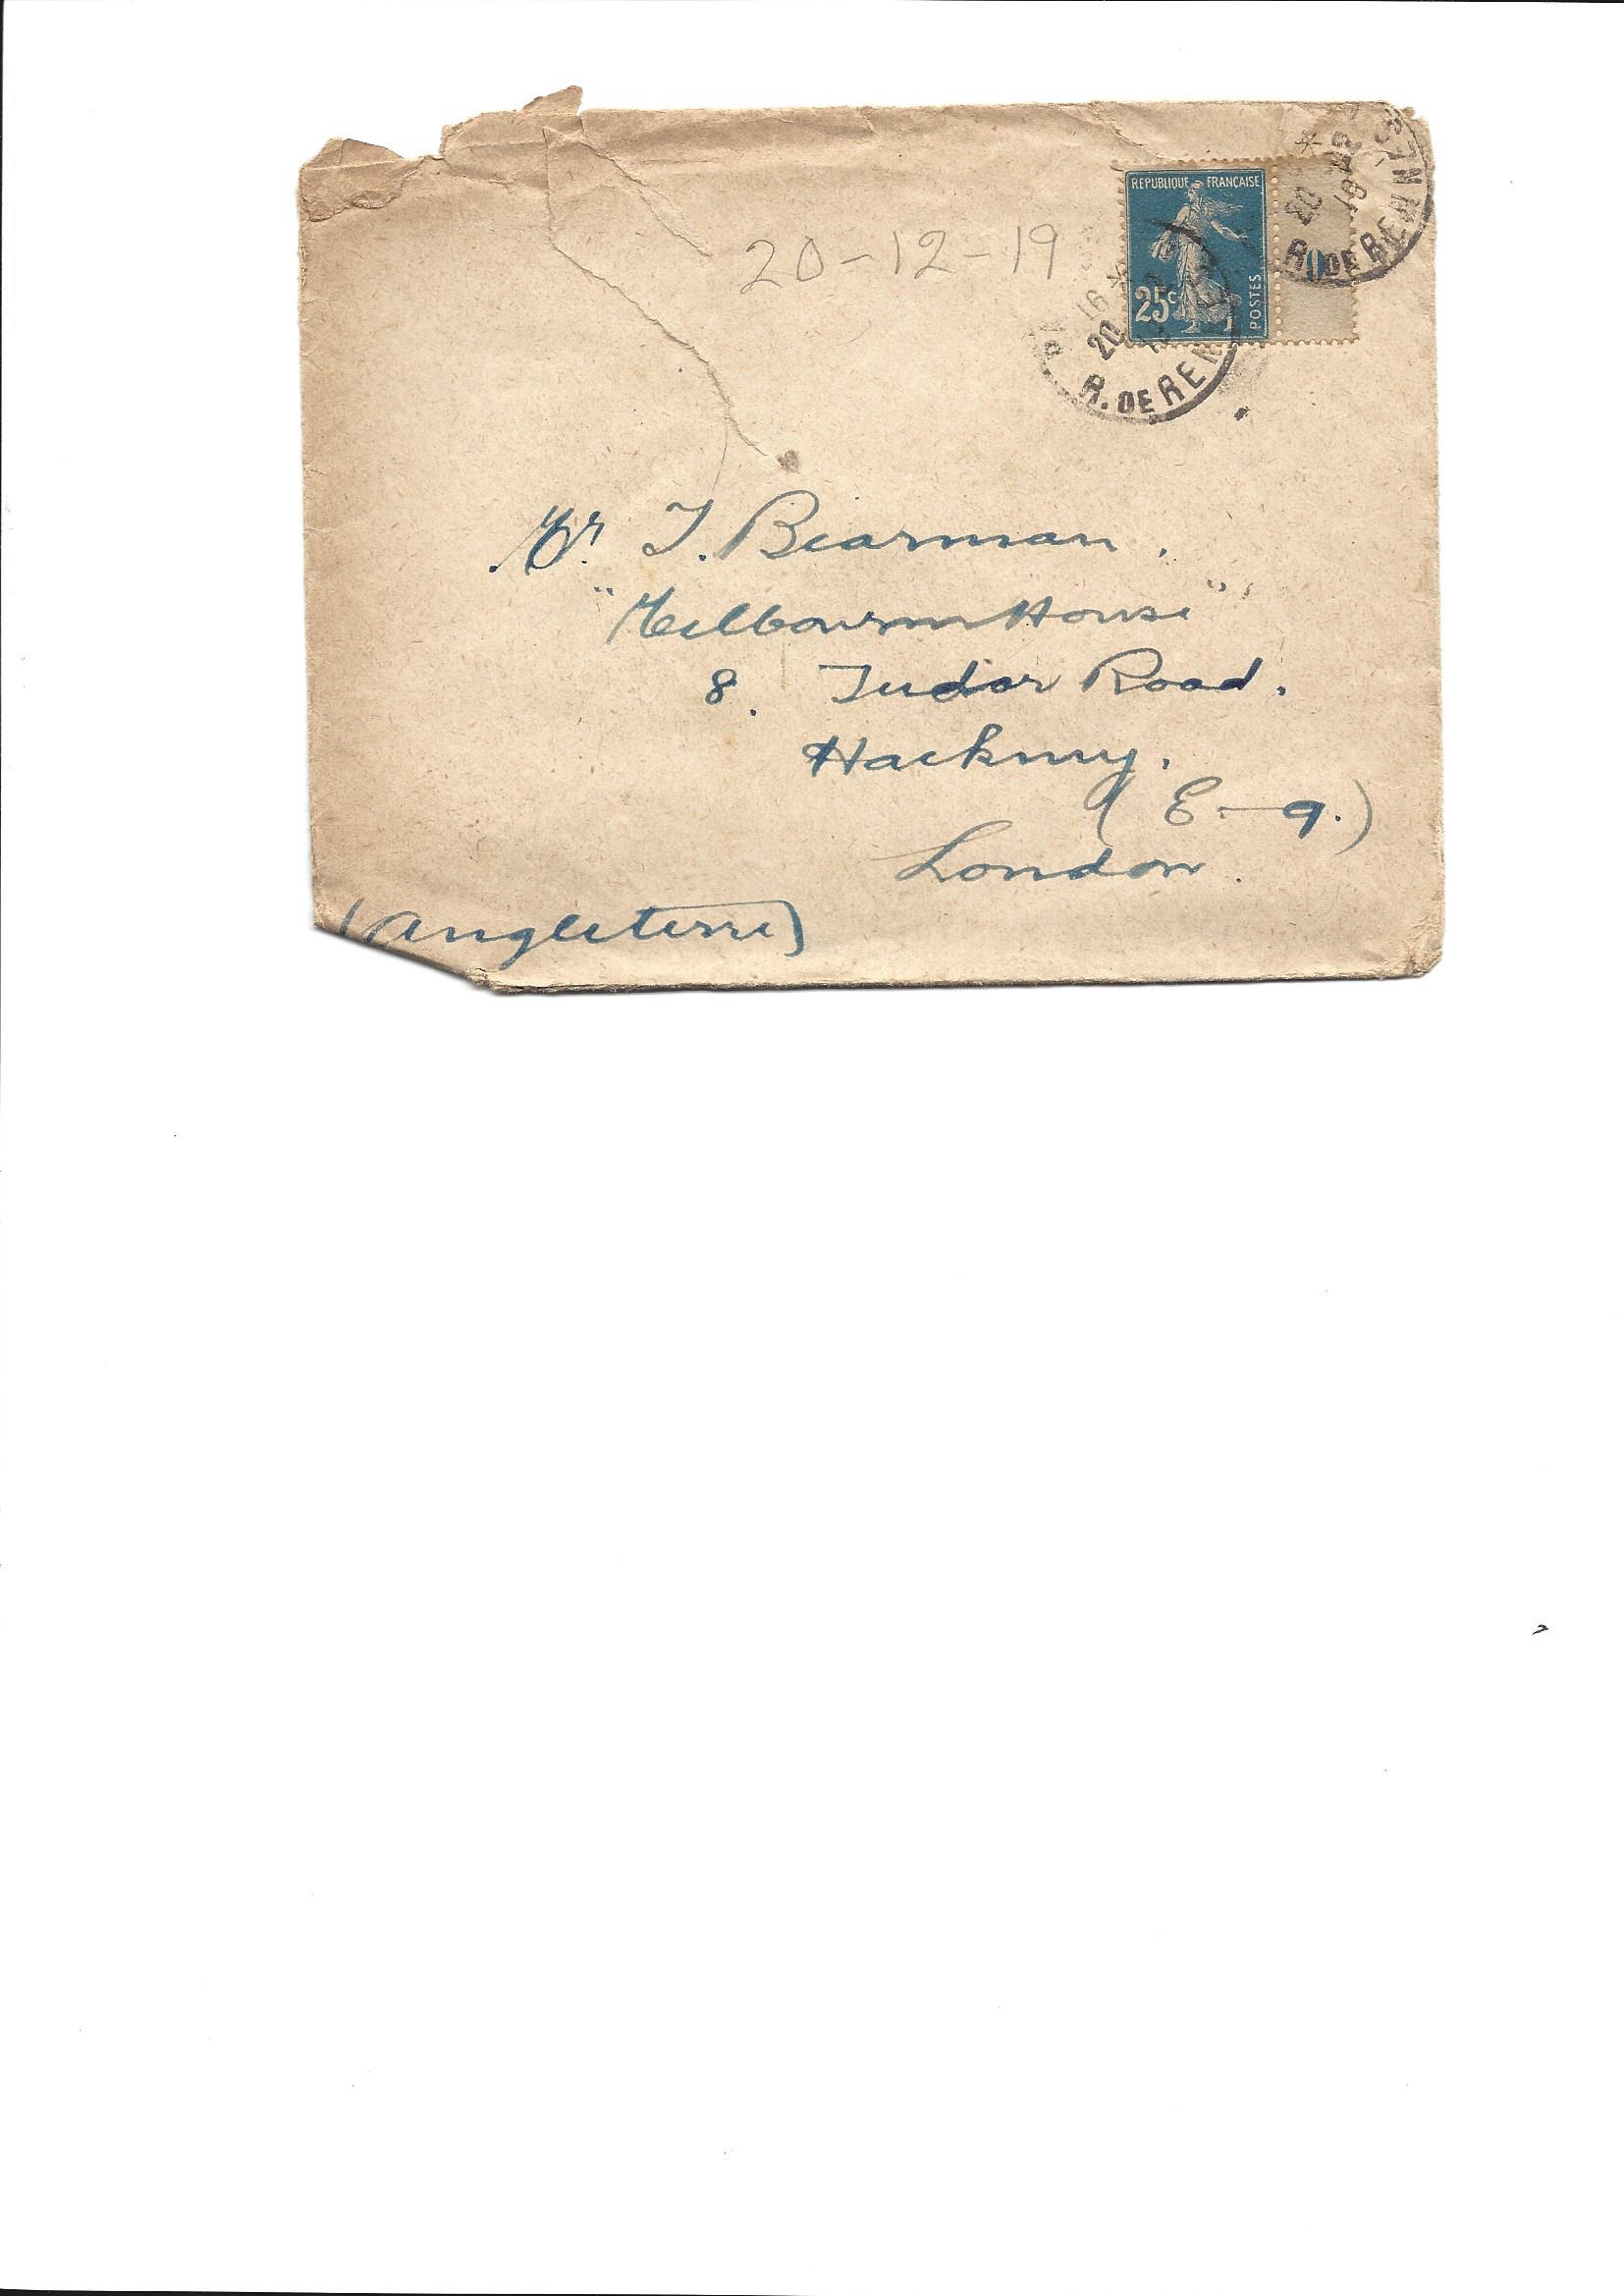 1919-12-20 page 1 letter by Donald Bearman